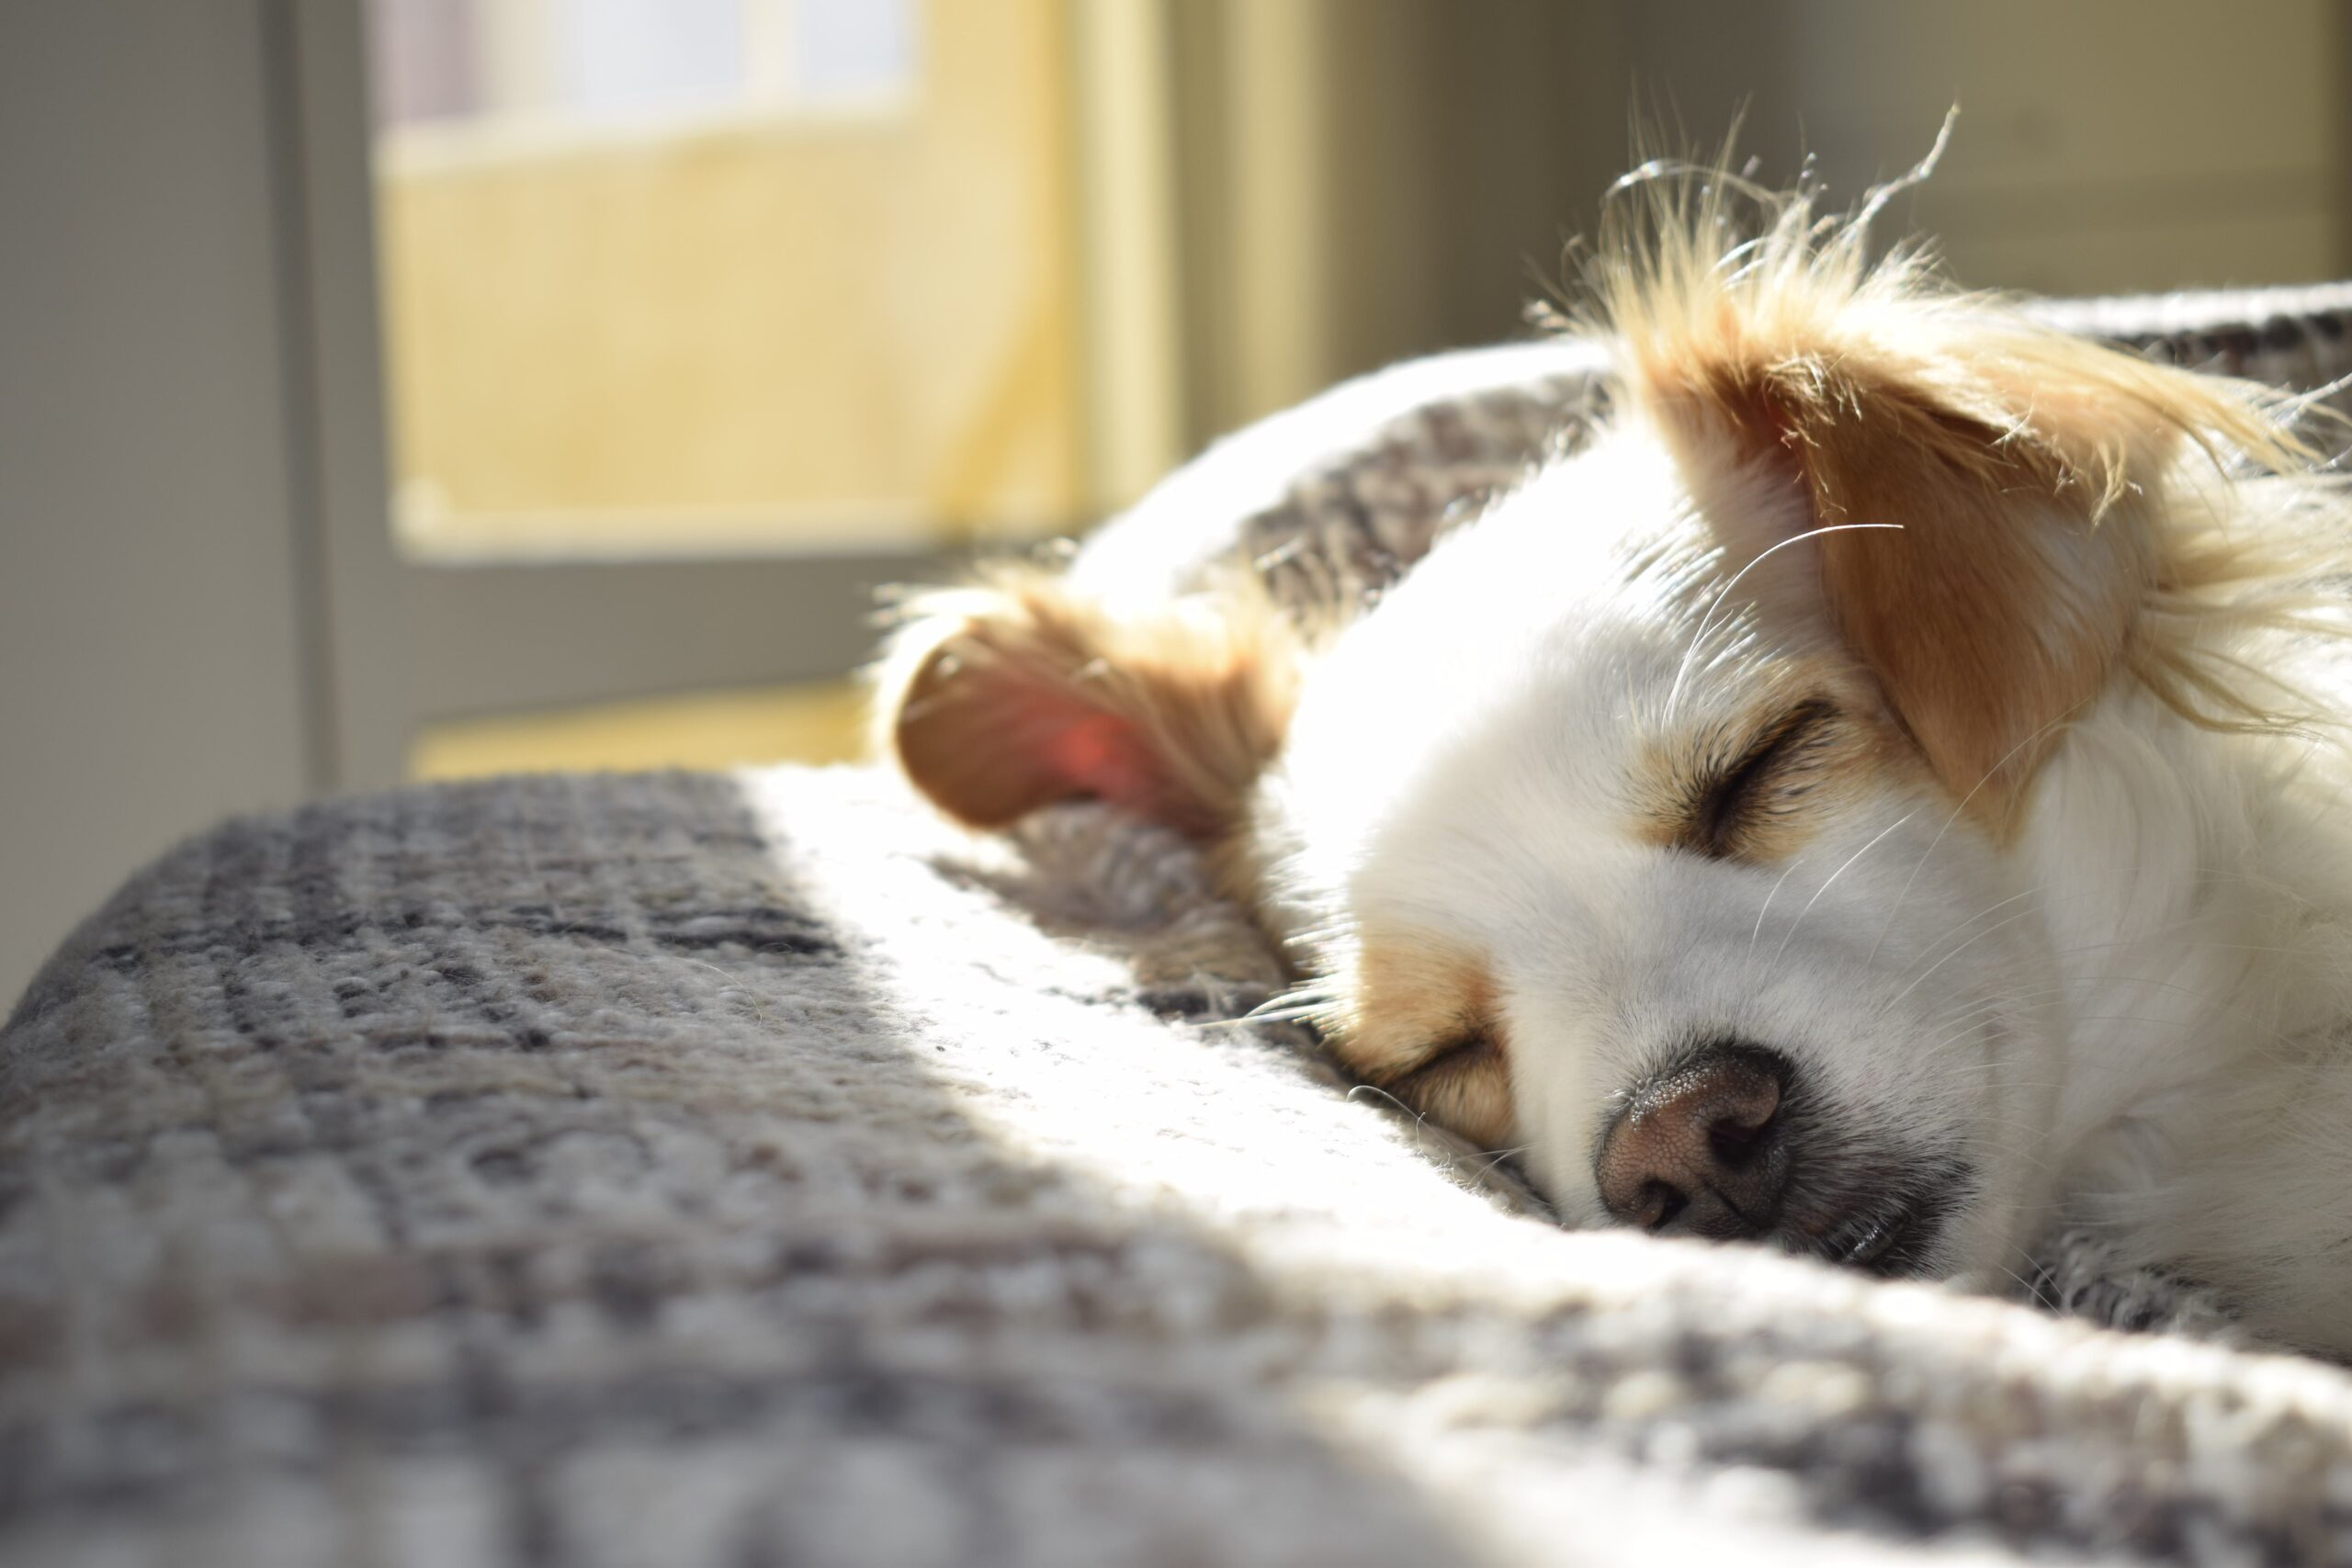 Considering renting to tenants with a pet? What do you need to know?